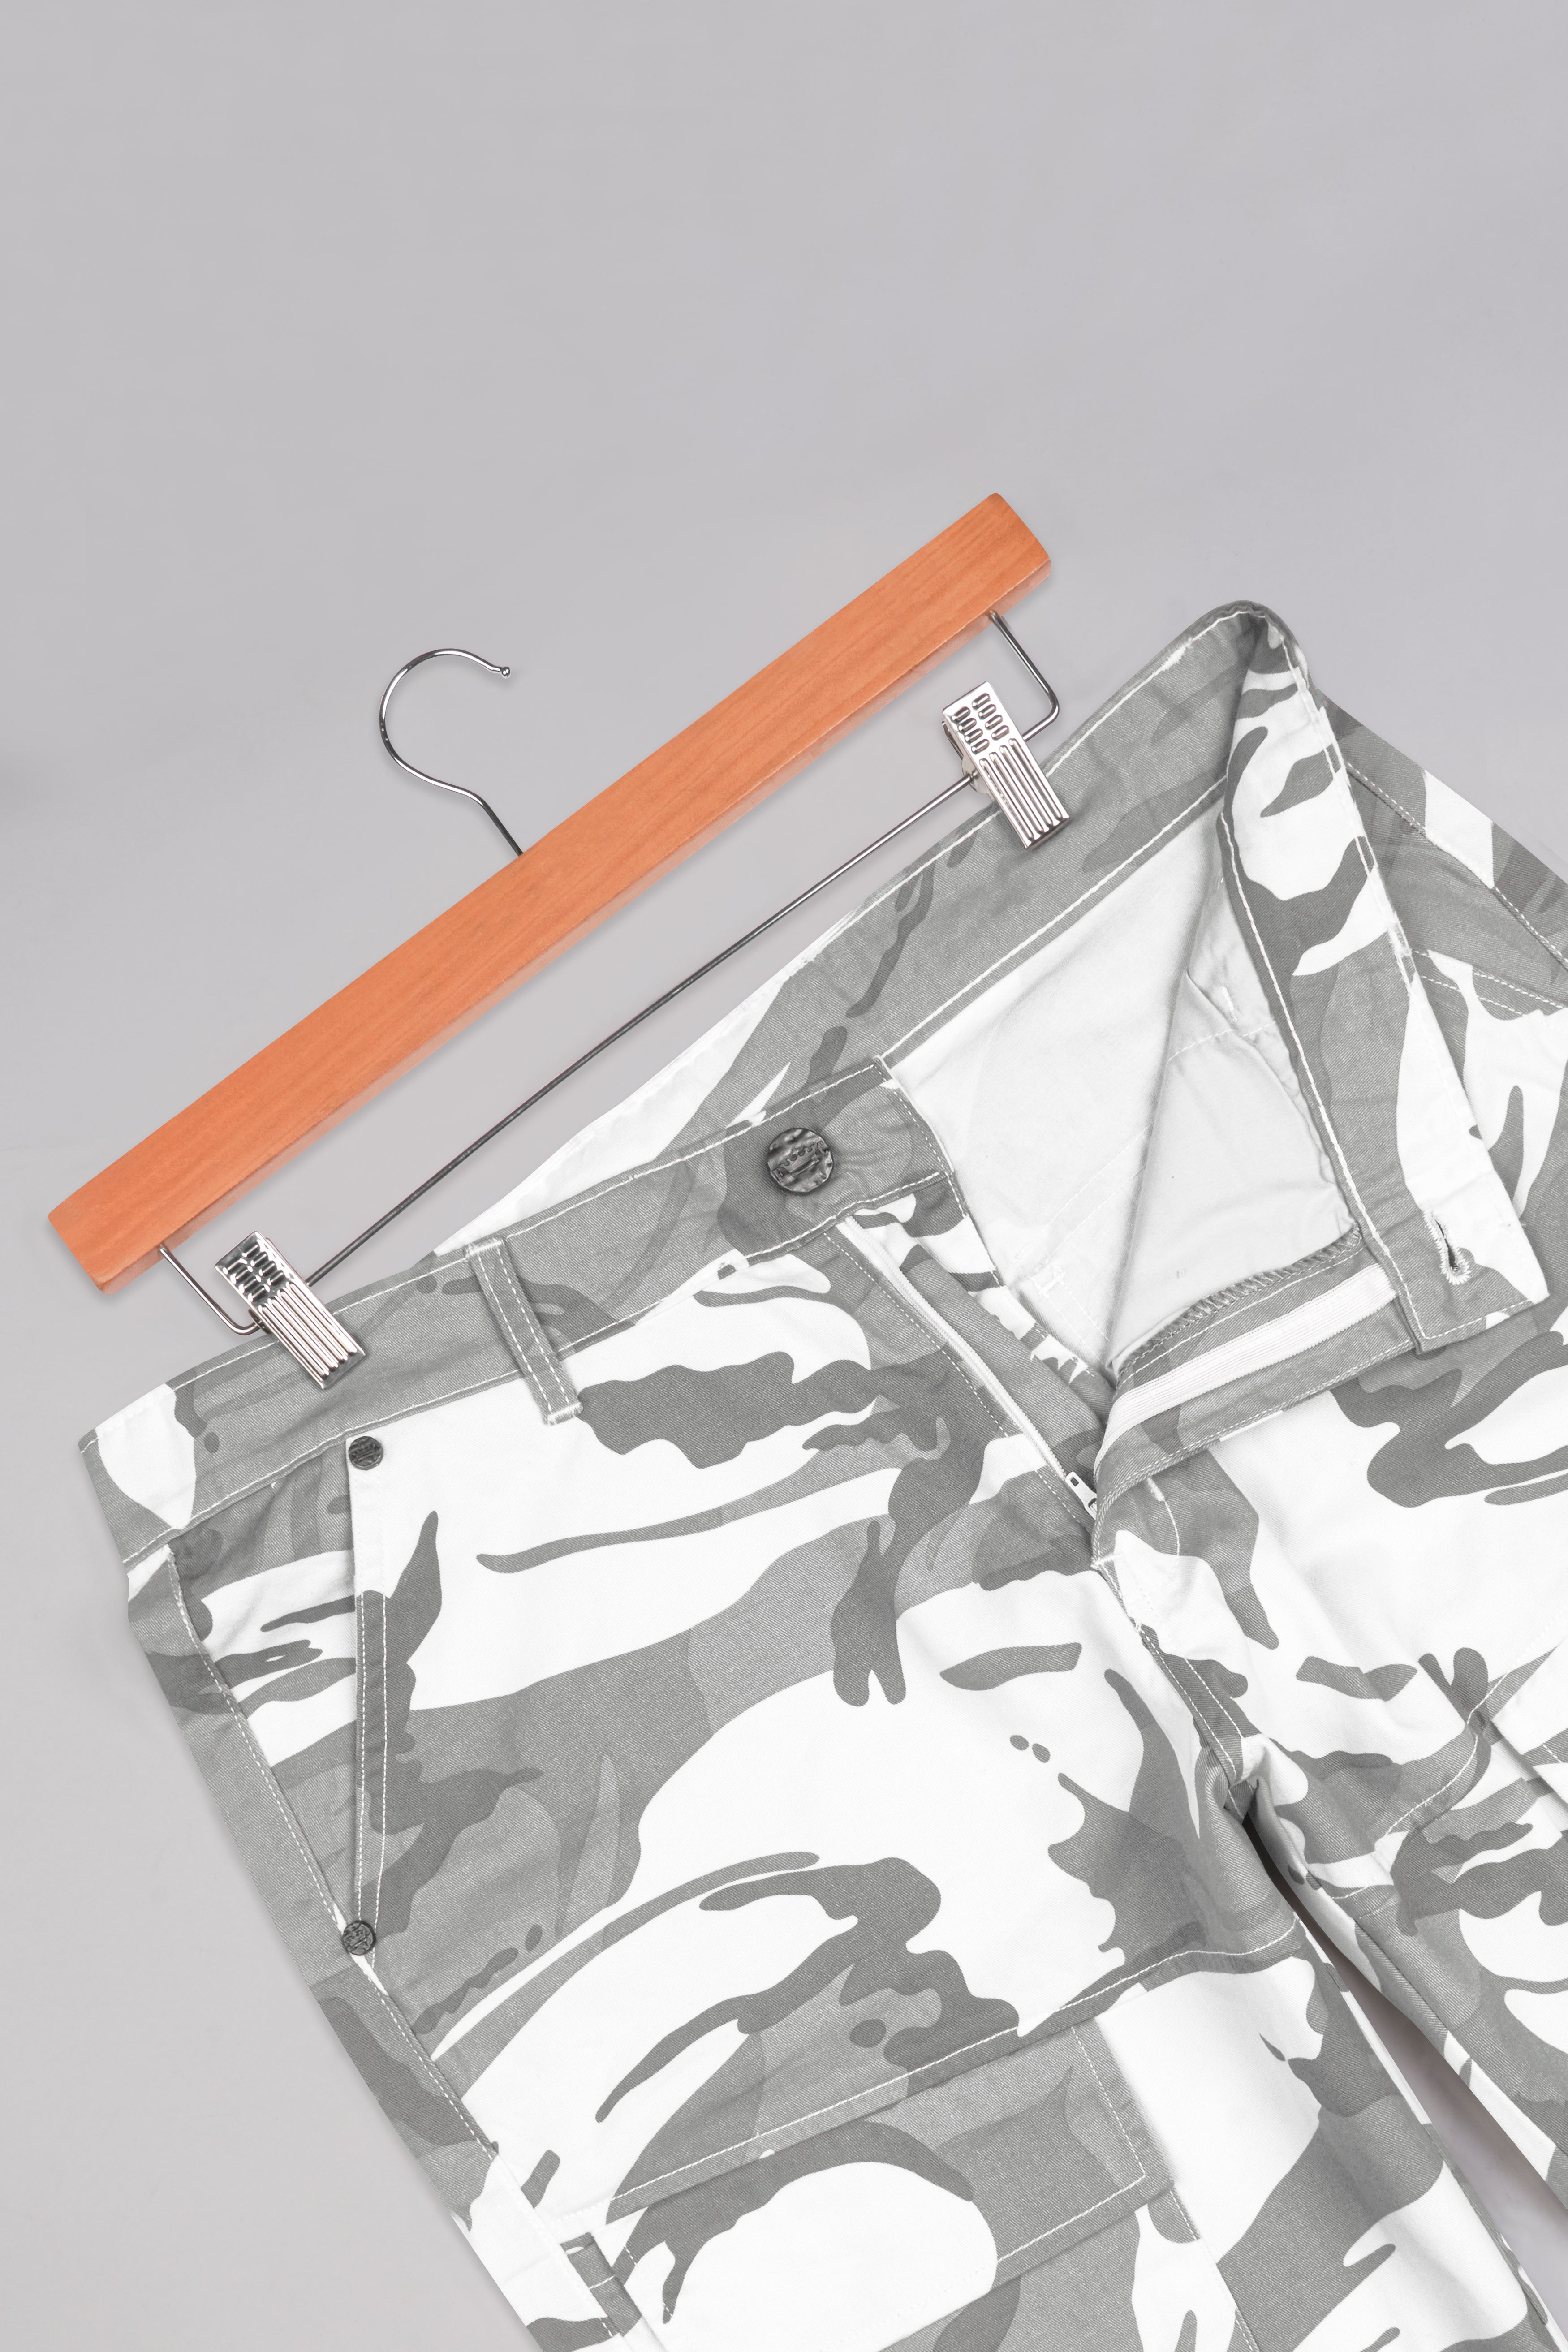 Bright White and Mist Gray Camouflage Cargo Shorts SR279-28, SR279-30, SR279-32, SR279-34, SR279-36, SR279-38, SR279-40, SR279-42, SR279-44